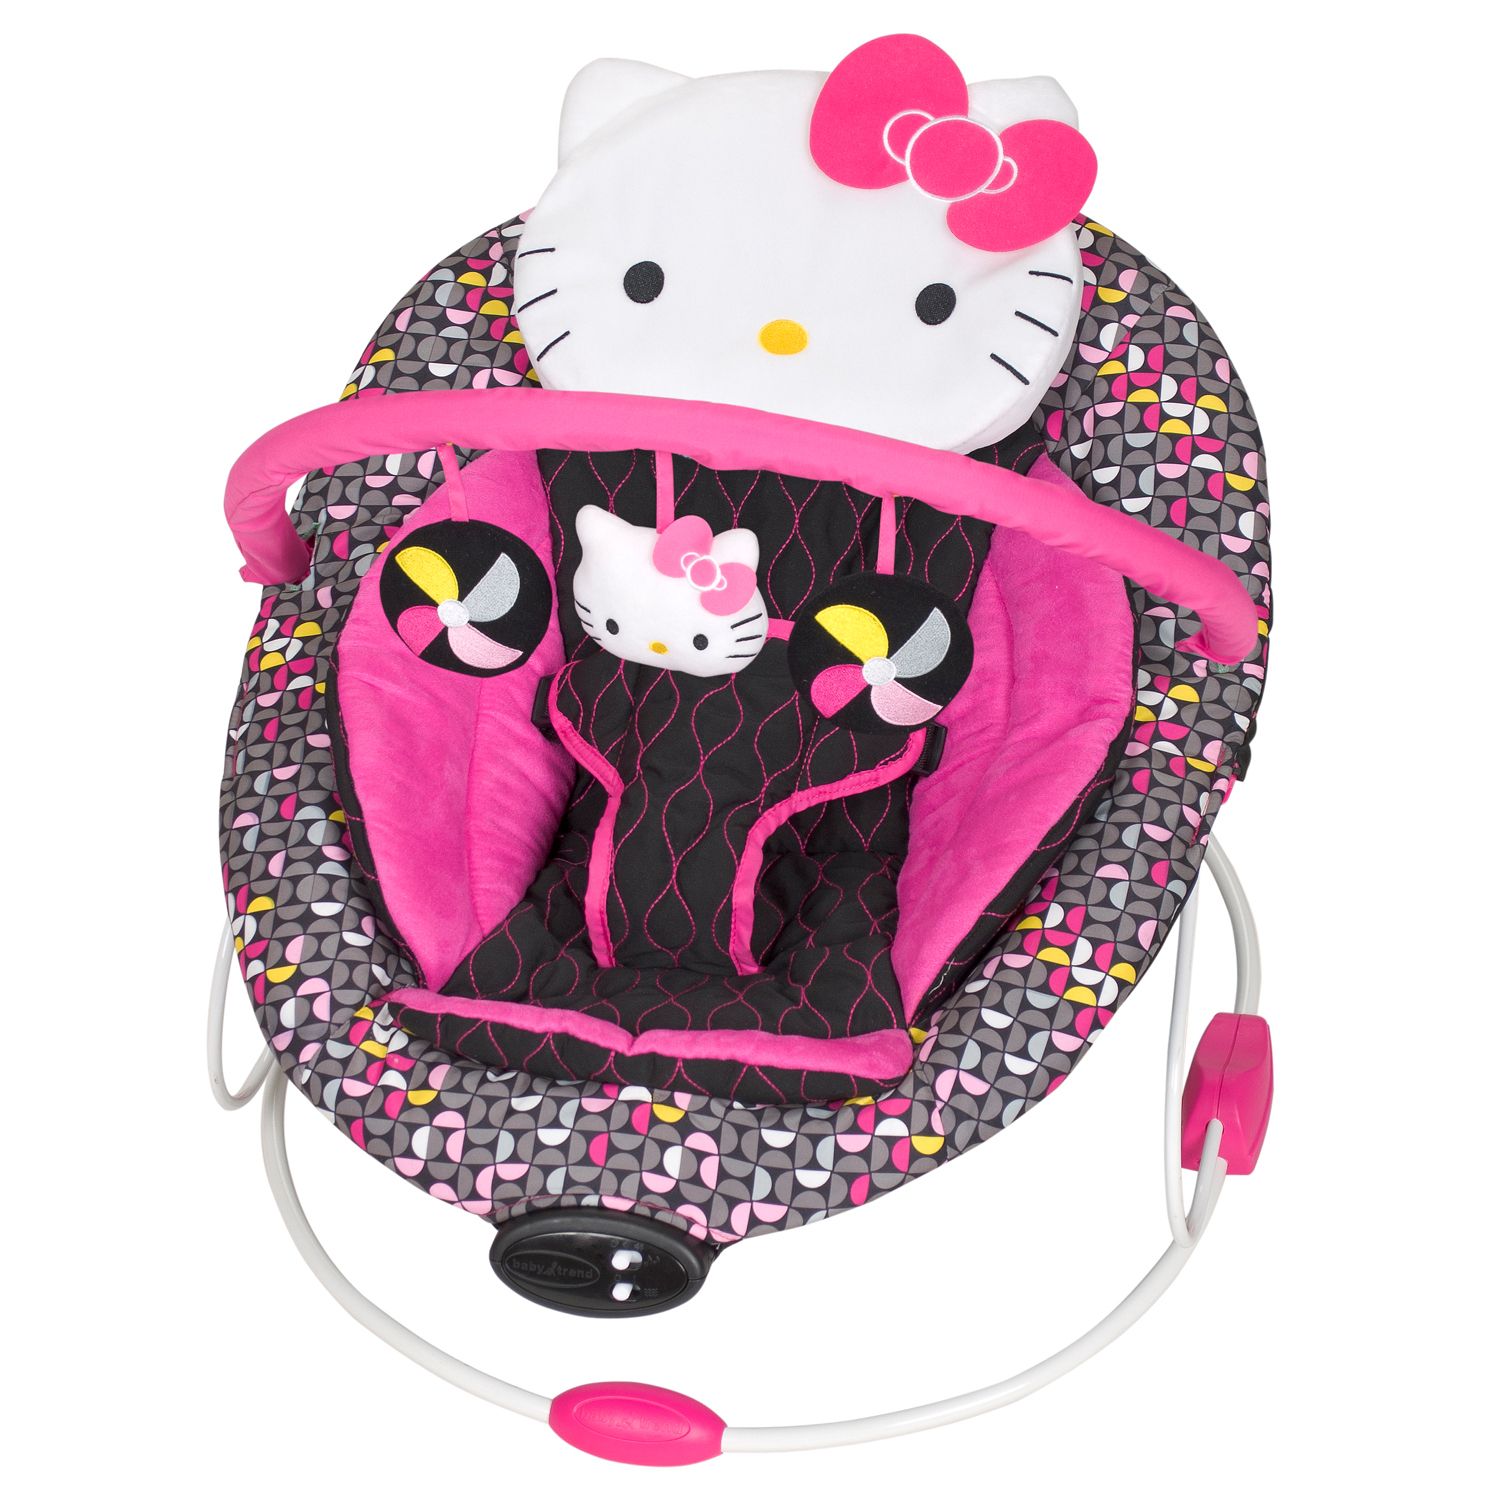 Hello Kitty® Pin Wheel Trend Bouncer by 